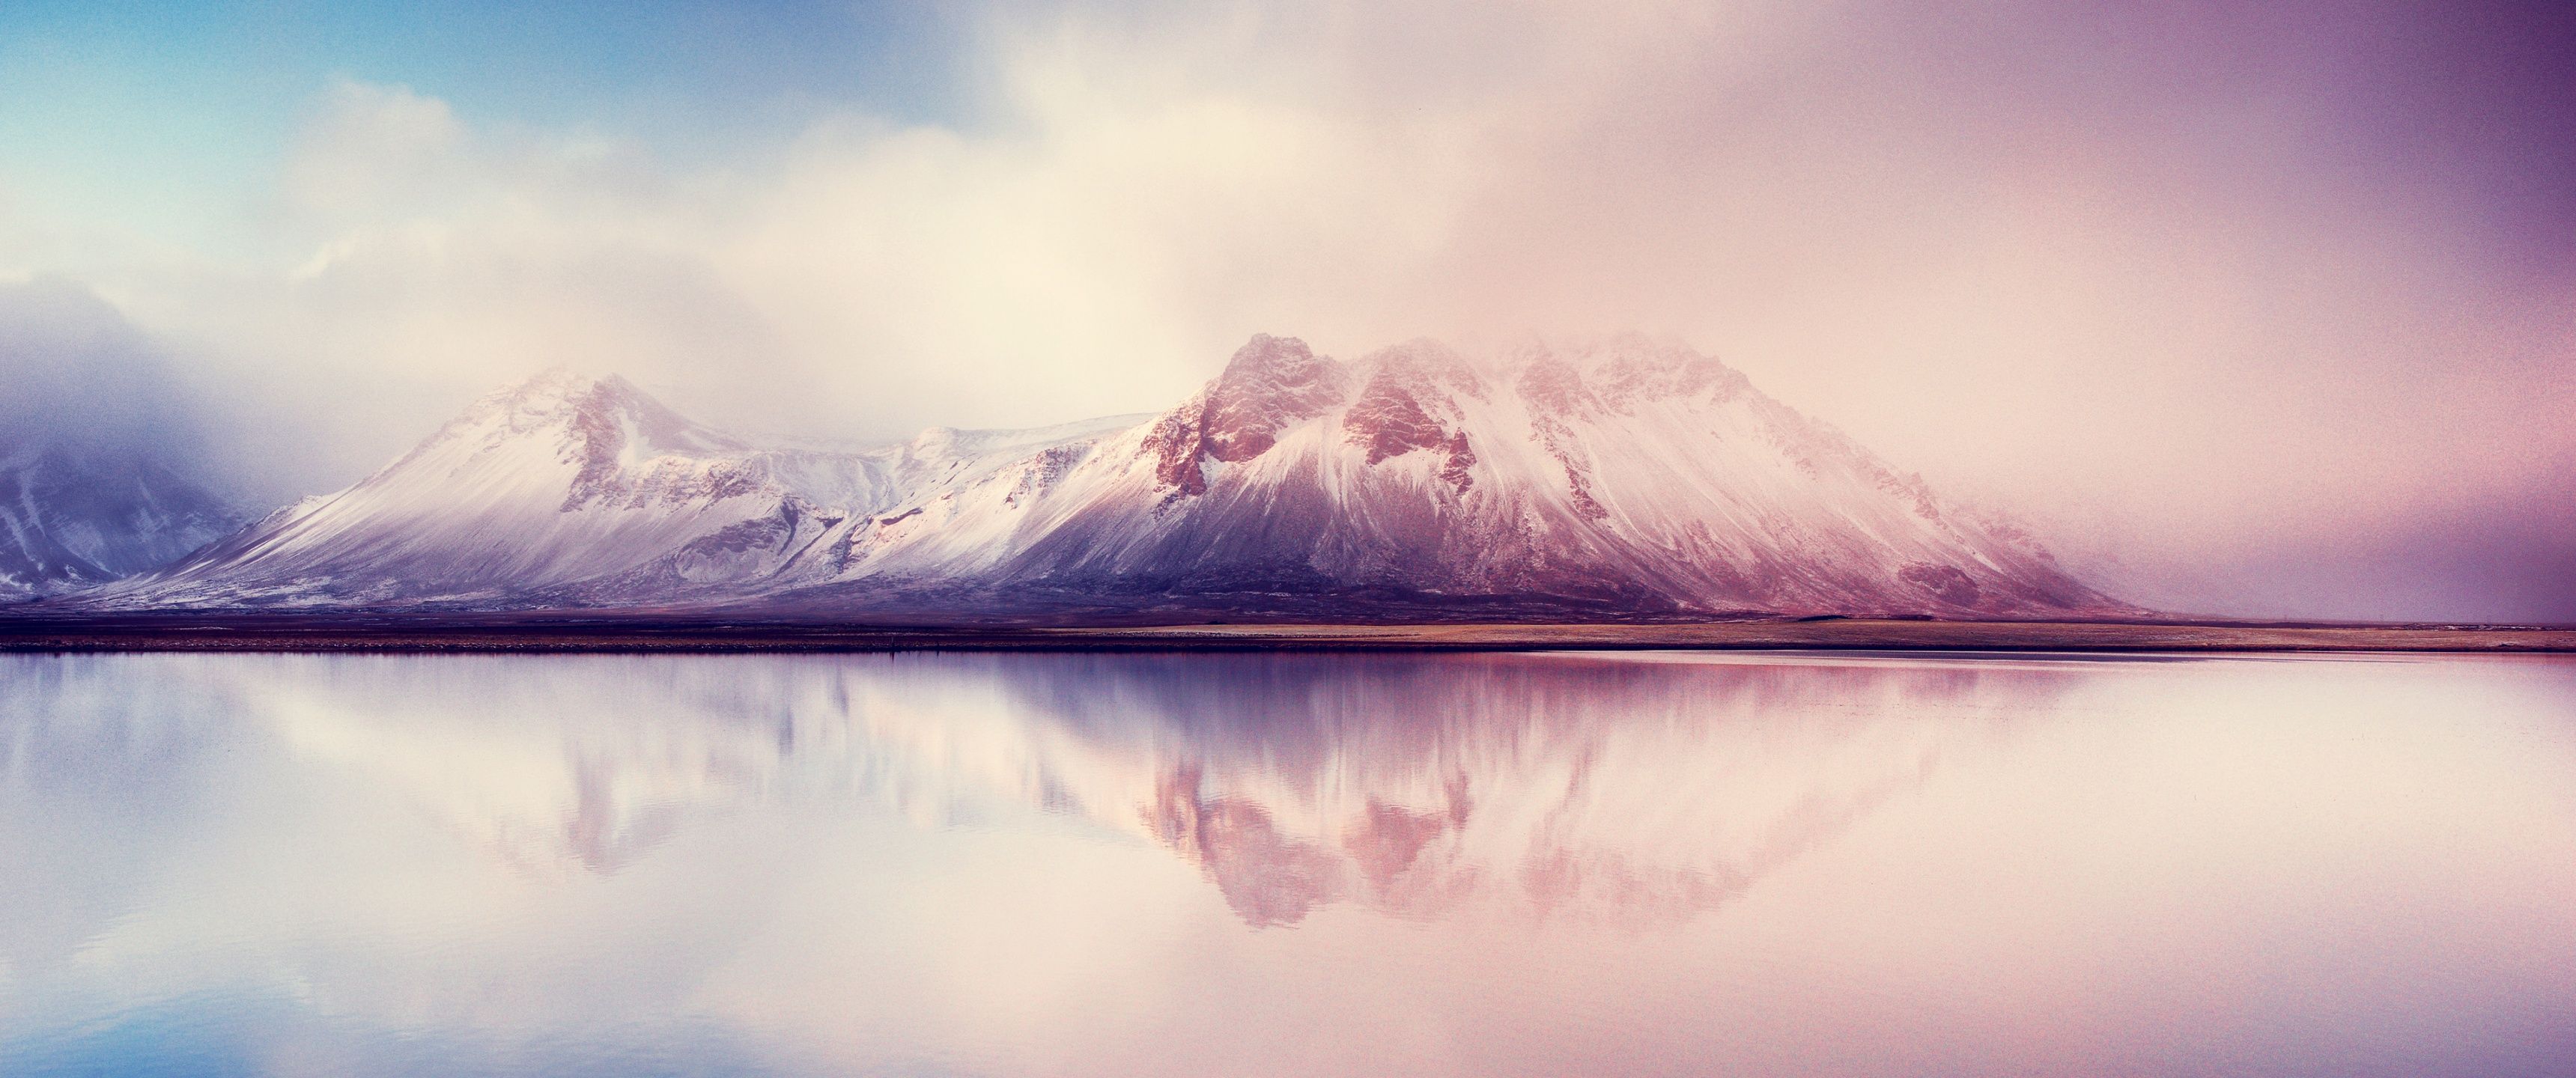 A serene mountain range is reflected in a calm lake, under a cloudy sky in this beautiful image. The snow-capped peaks of the mountains are a sight to behold, with the mist adding to the mystical atmosphere. This is a perfect representation of the beauty of nature, and a must-see for all nature lovers. - 3440x1440, lake, mountain